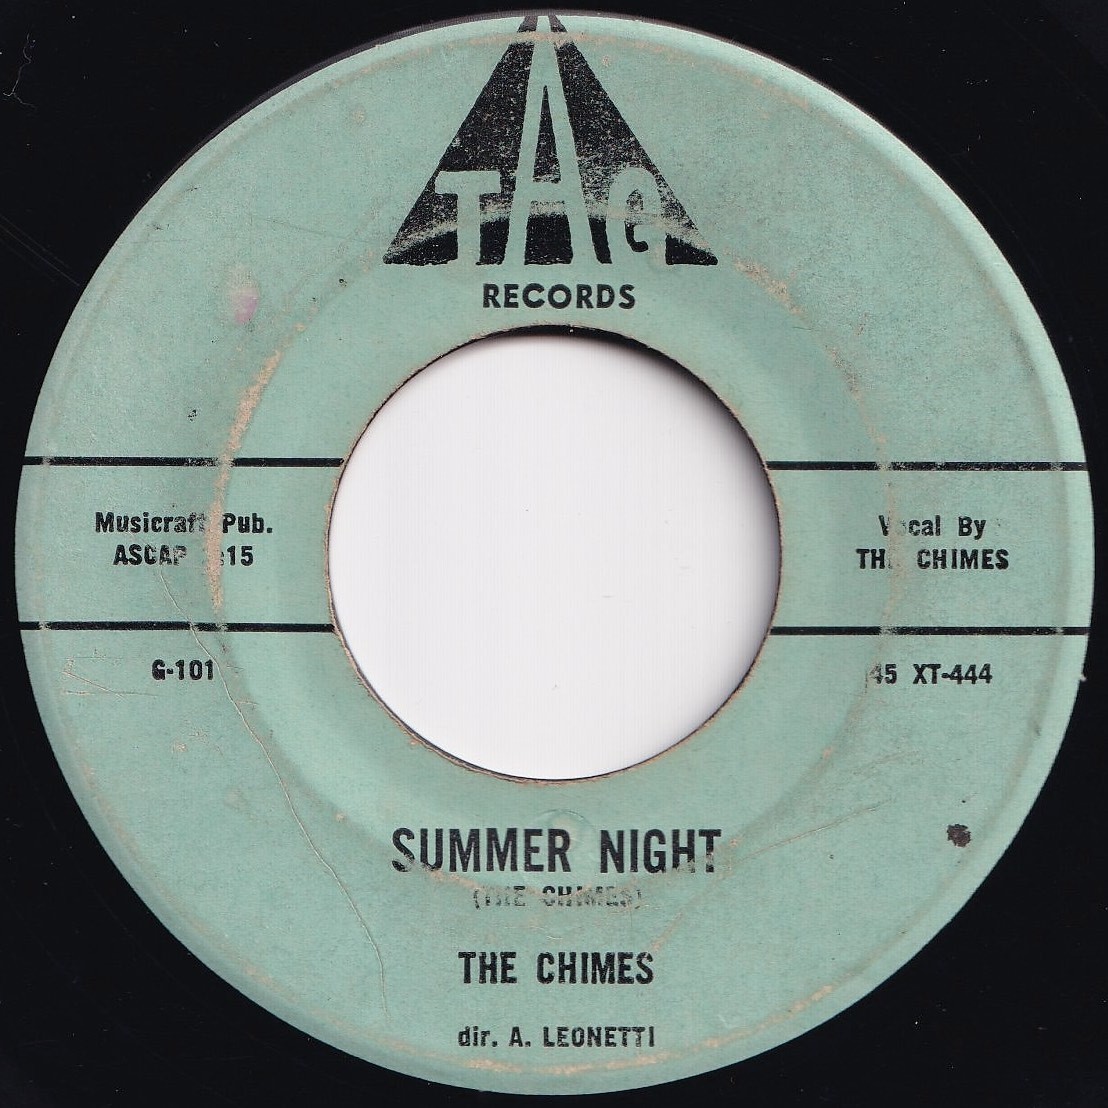 Chimes Once In Awhile / Summer Night Tag US 45 XT-444 205496 R&B R&R レコード 7インチ 45_画像2